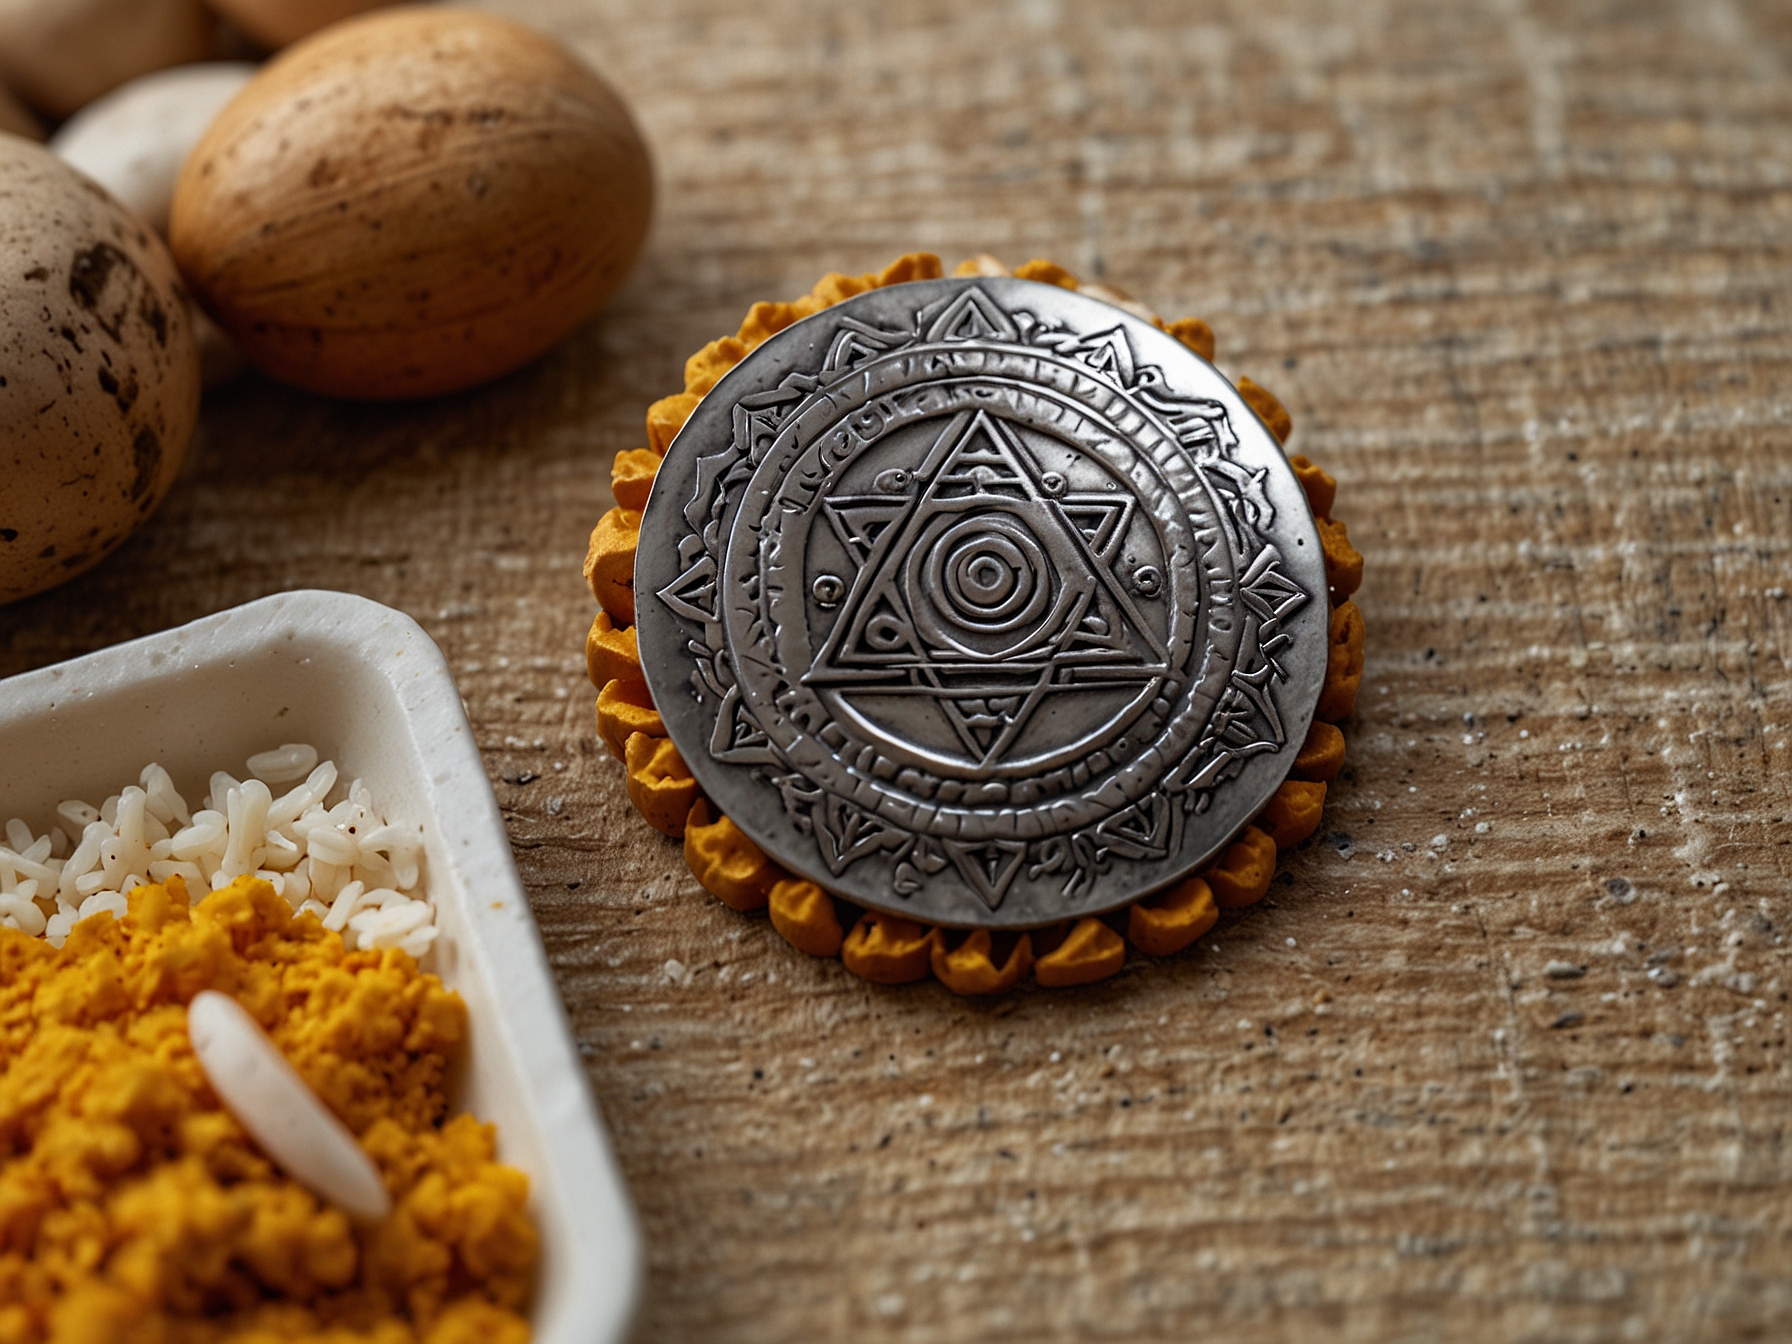 A close-up of a Gomti Chakra, Shree Yantra, and cowrie shell against a background of rice with turmeric and a silver coin, illustrating the harmonious blend of these auspicious wealth-attracting items.